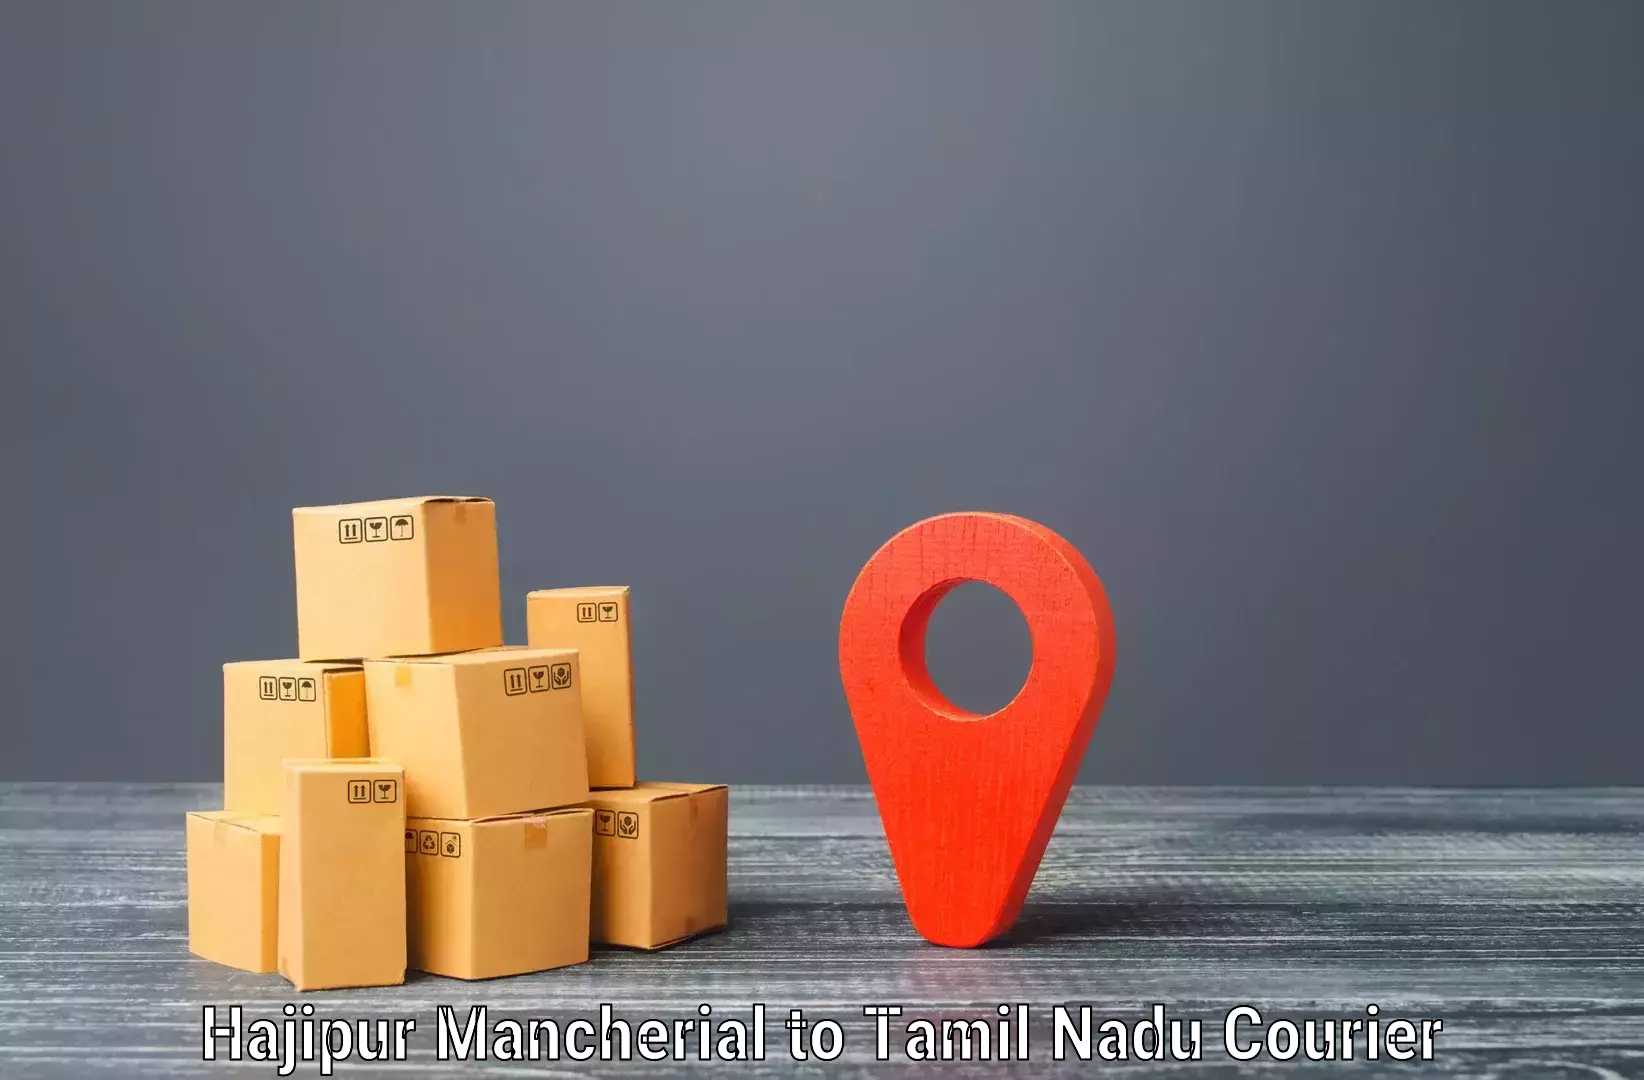 Express mail solutions Hajipur Mancherial to Nagercoil